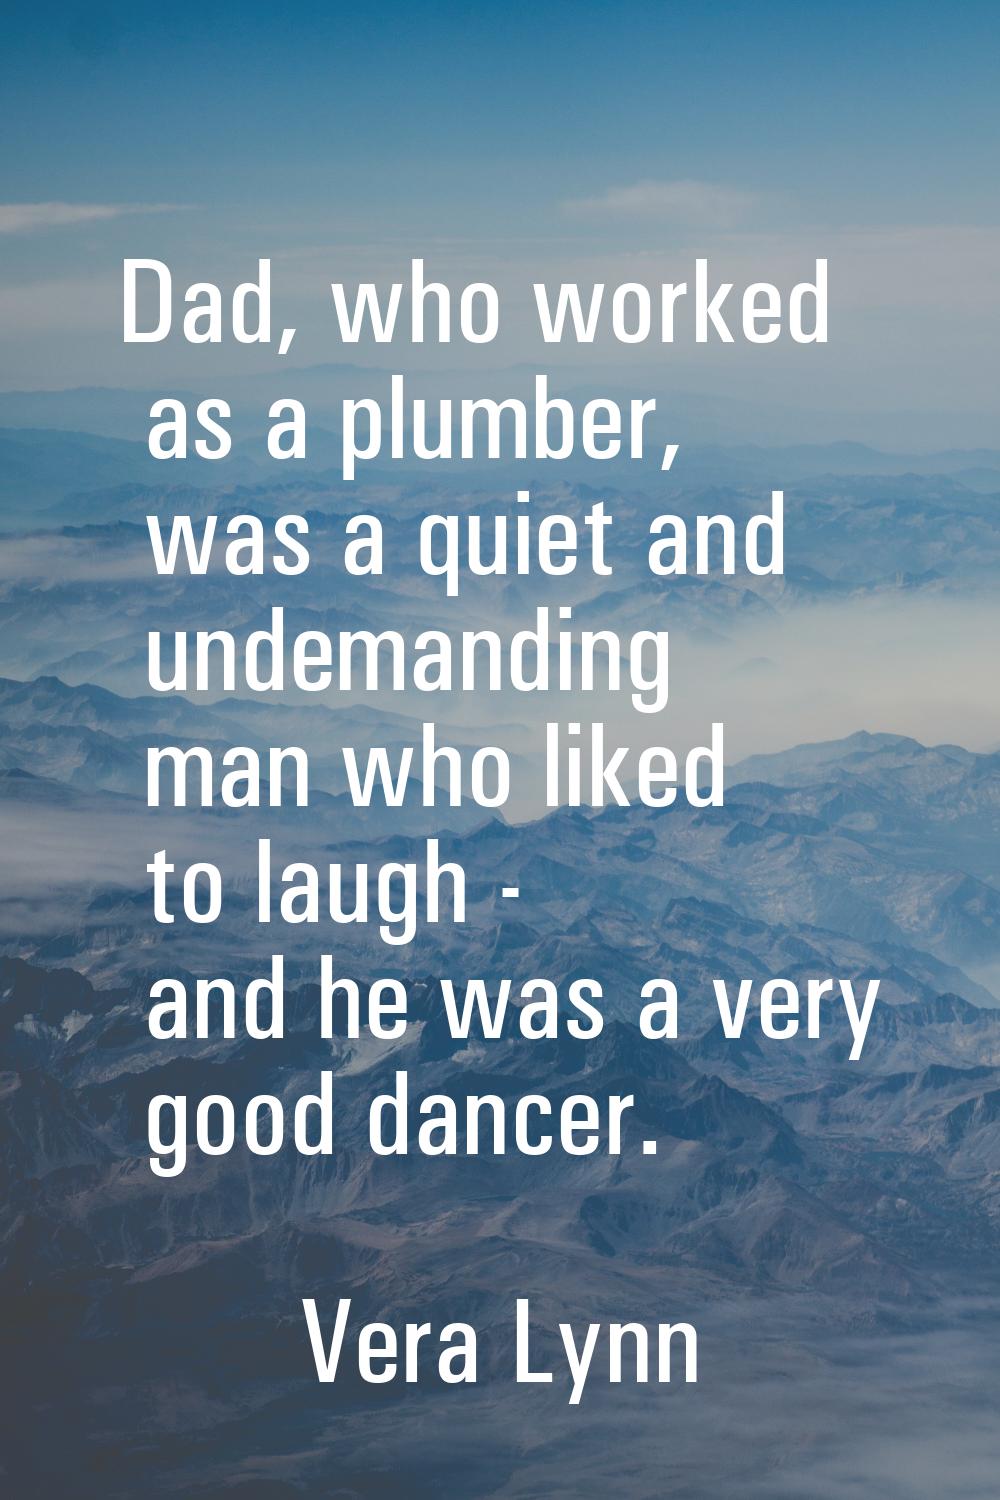 Dad, who worked as a plumber, was a quiet and undemanding man who liked to laugh - and he was a ver